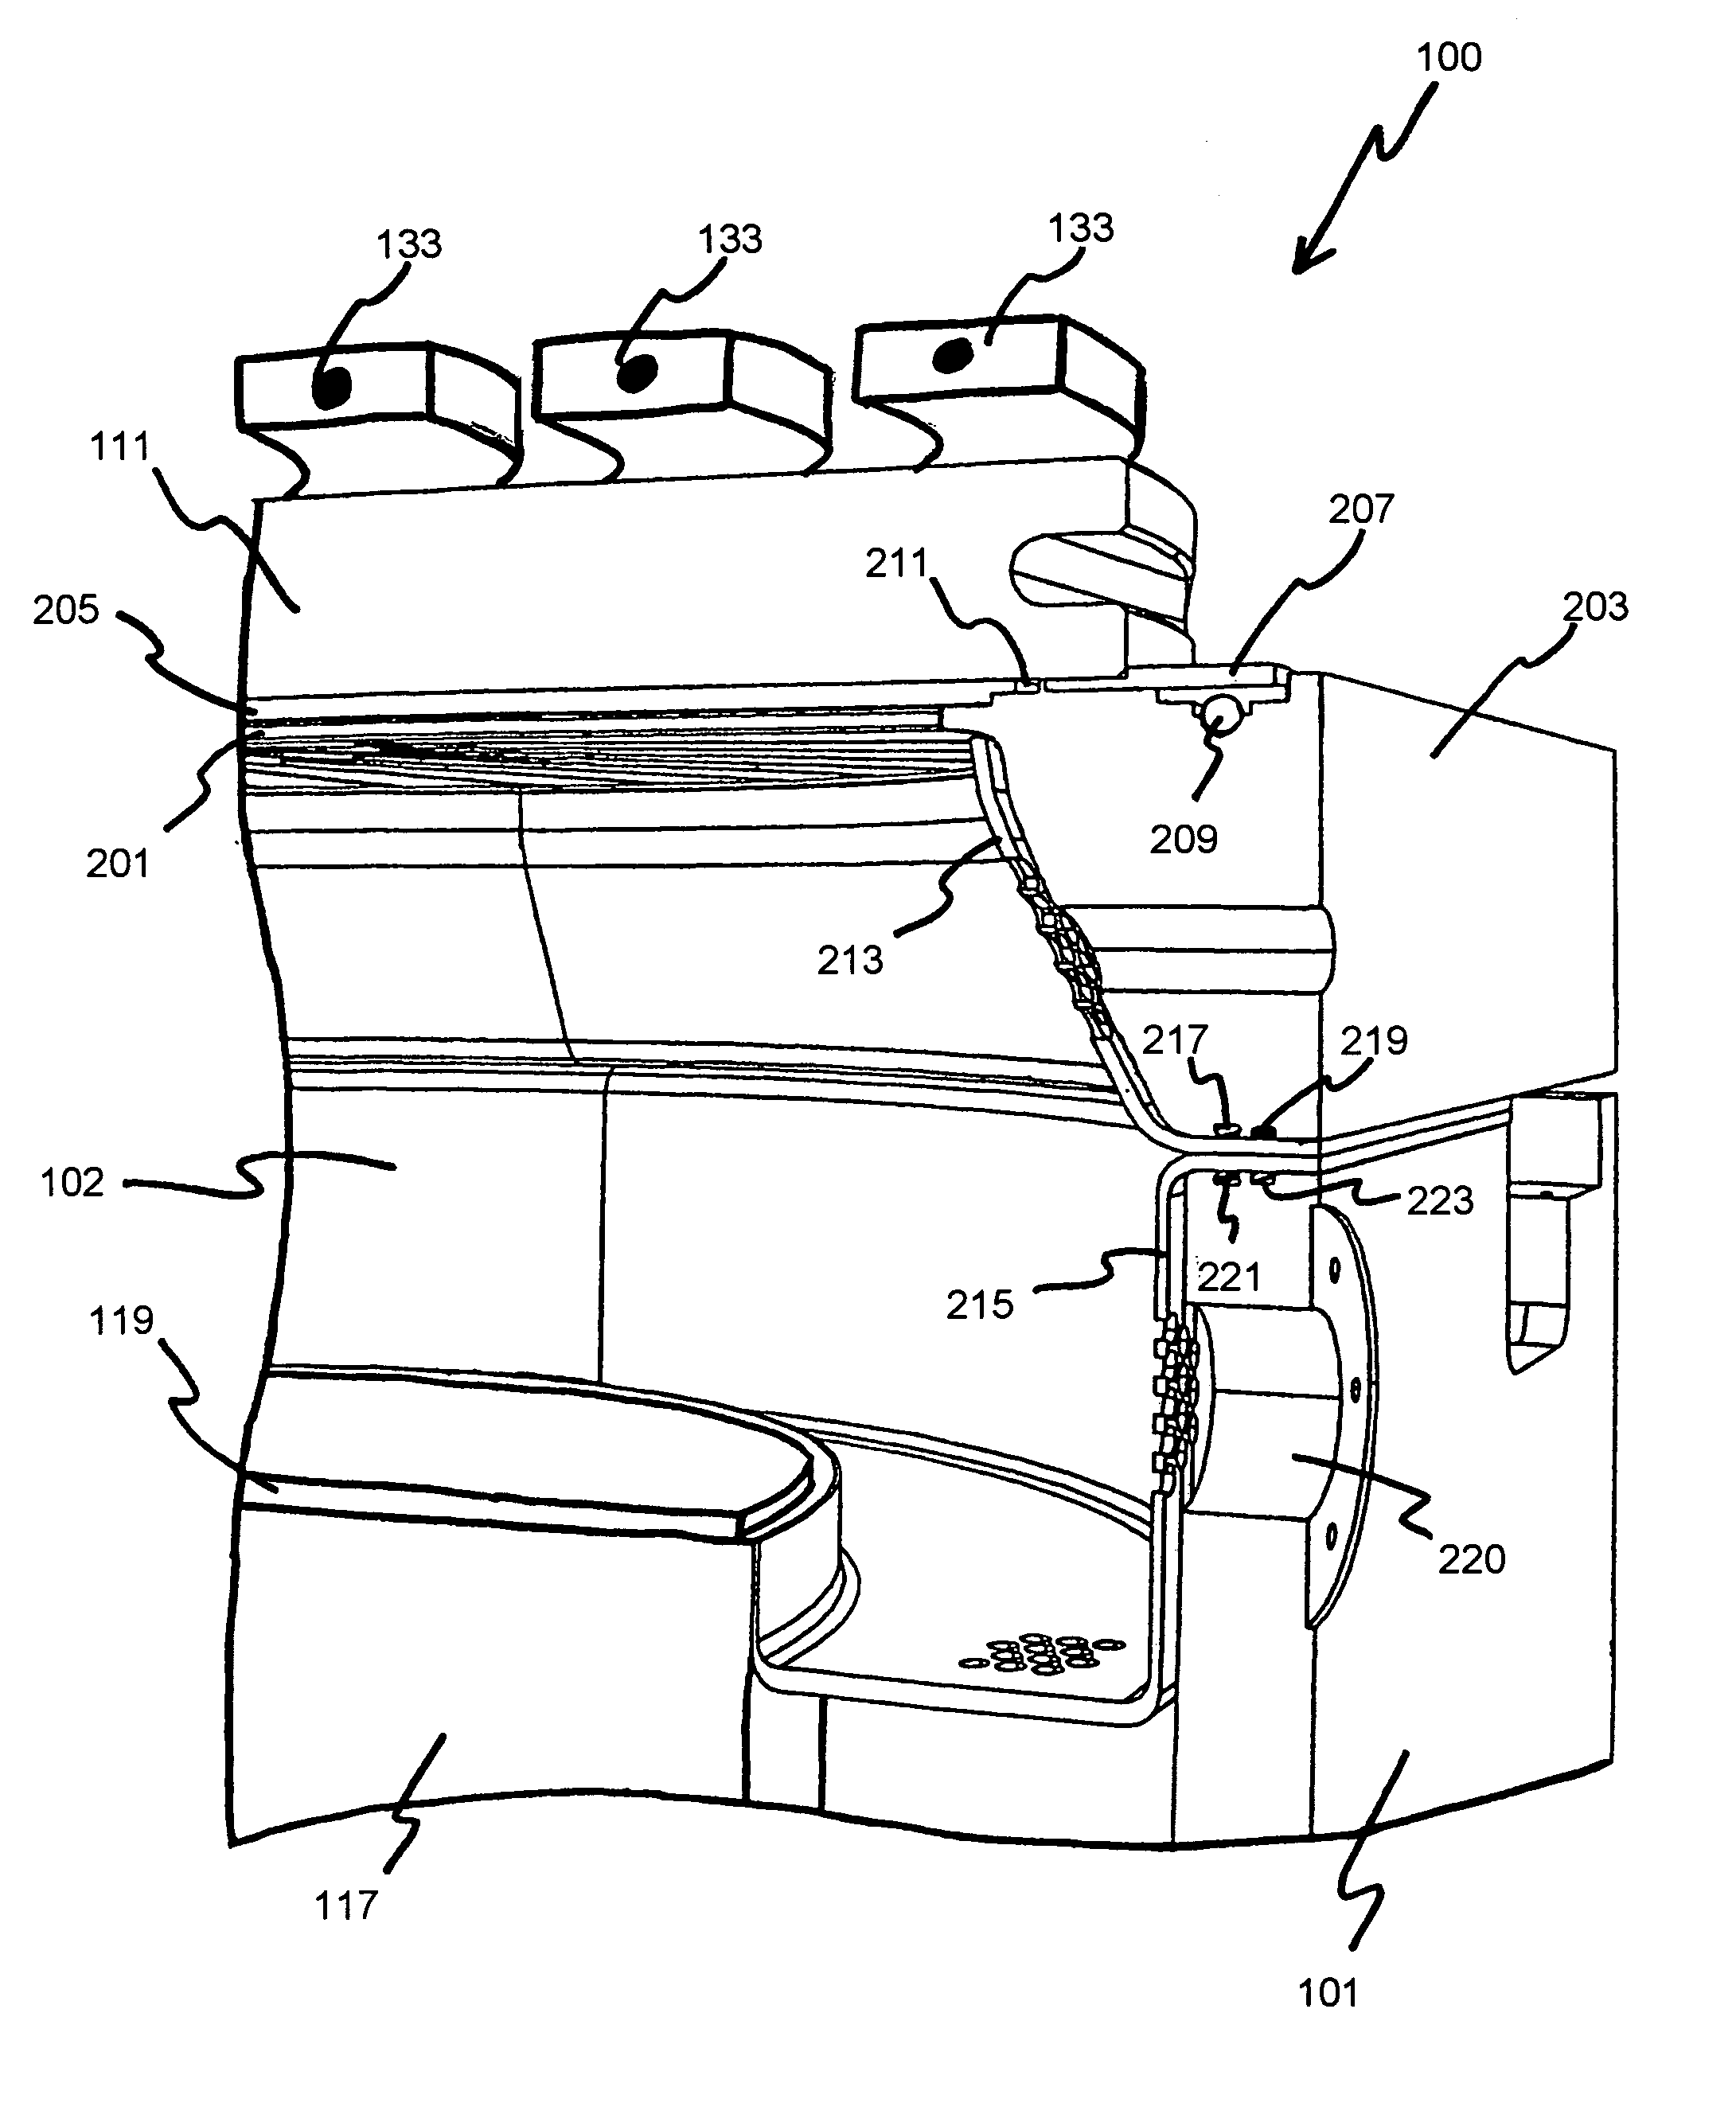 Faraday shield disposed within an inductively coupled plasma etching apparatus